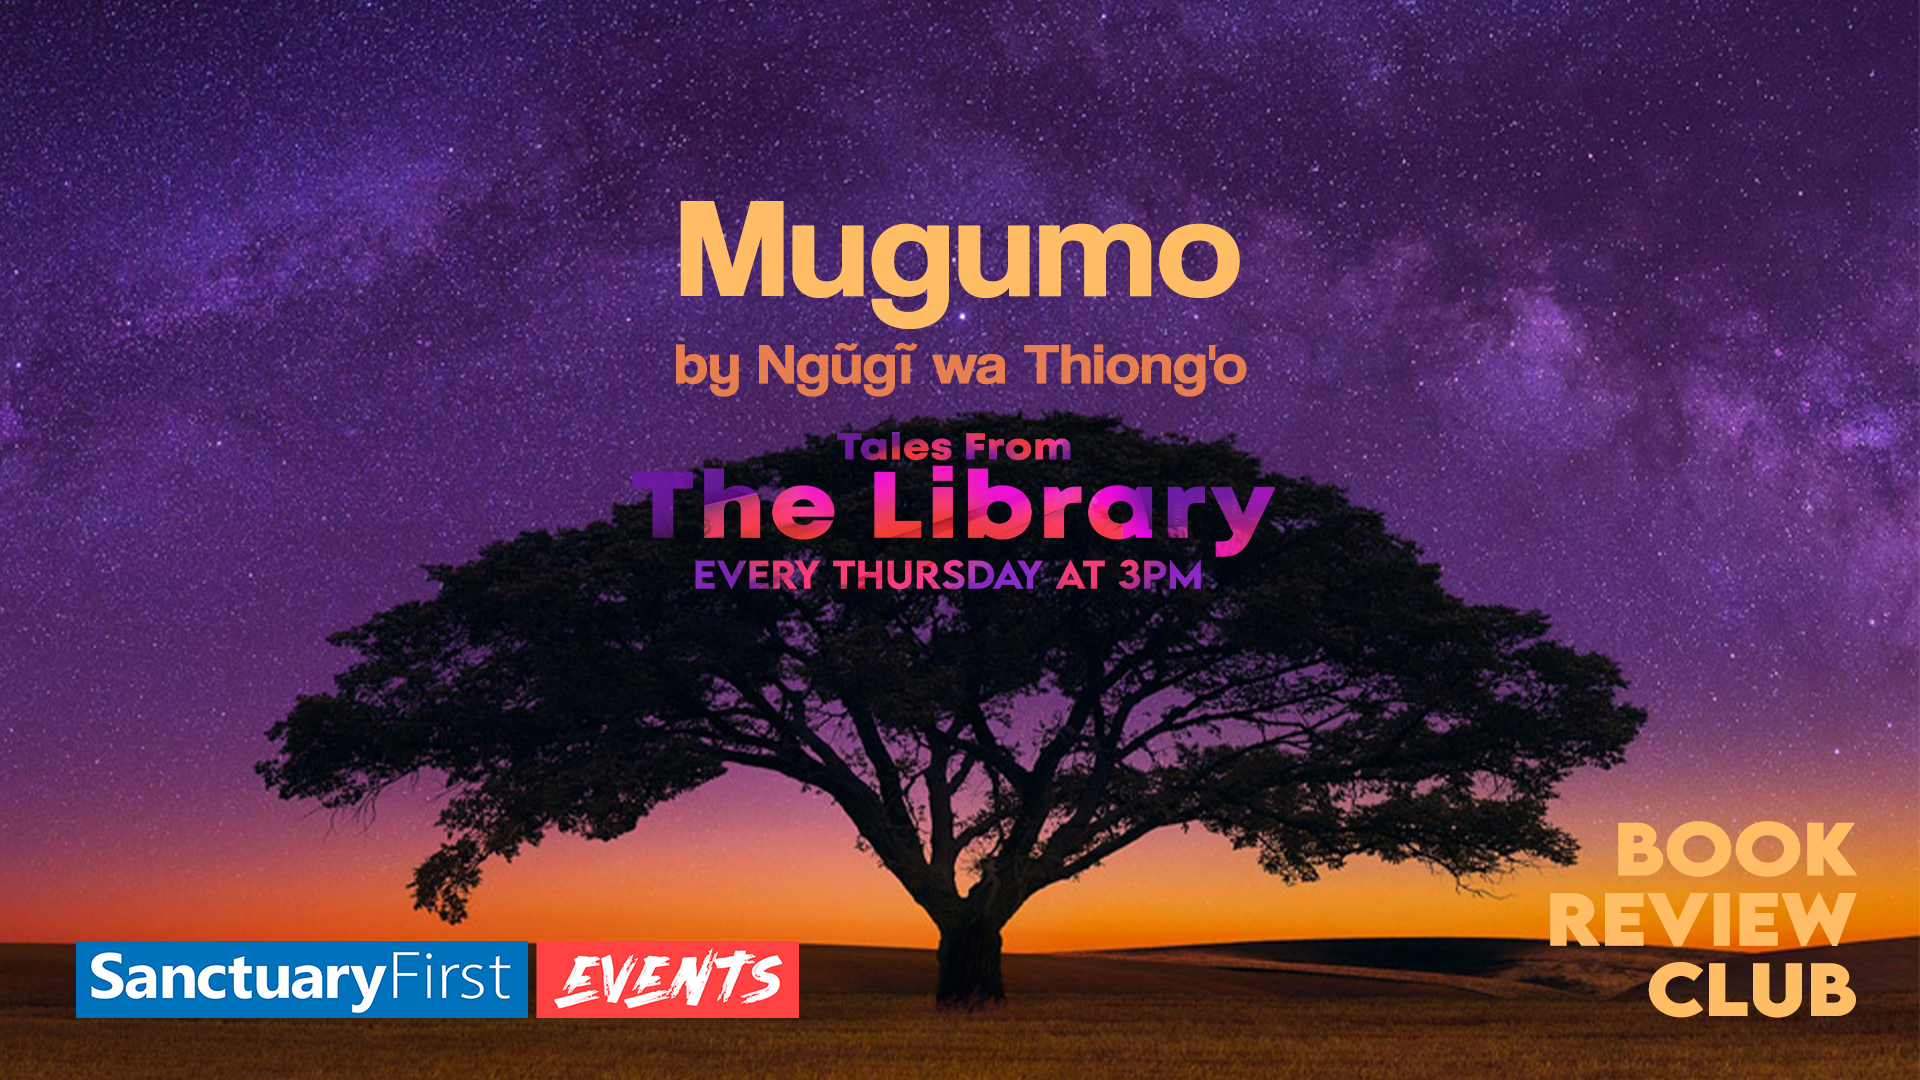 Tales From The Library - Mugumo